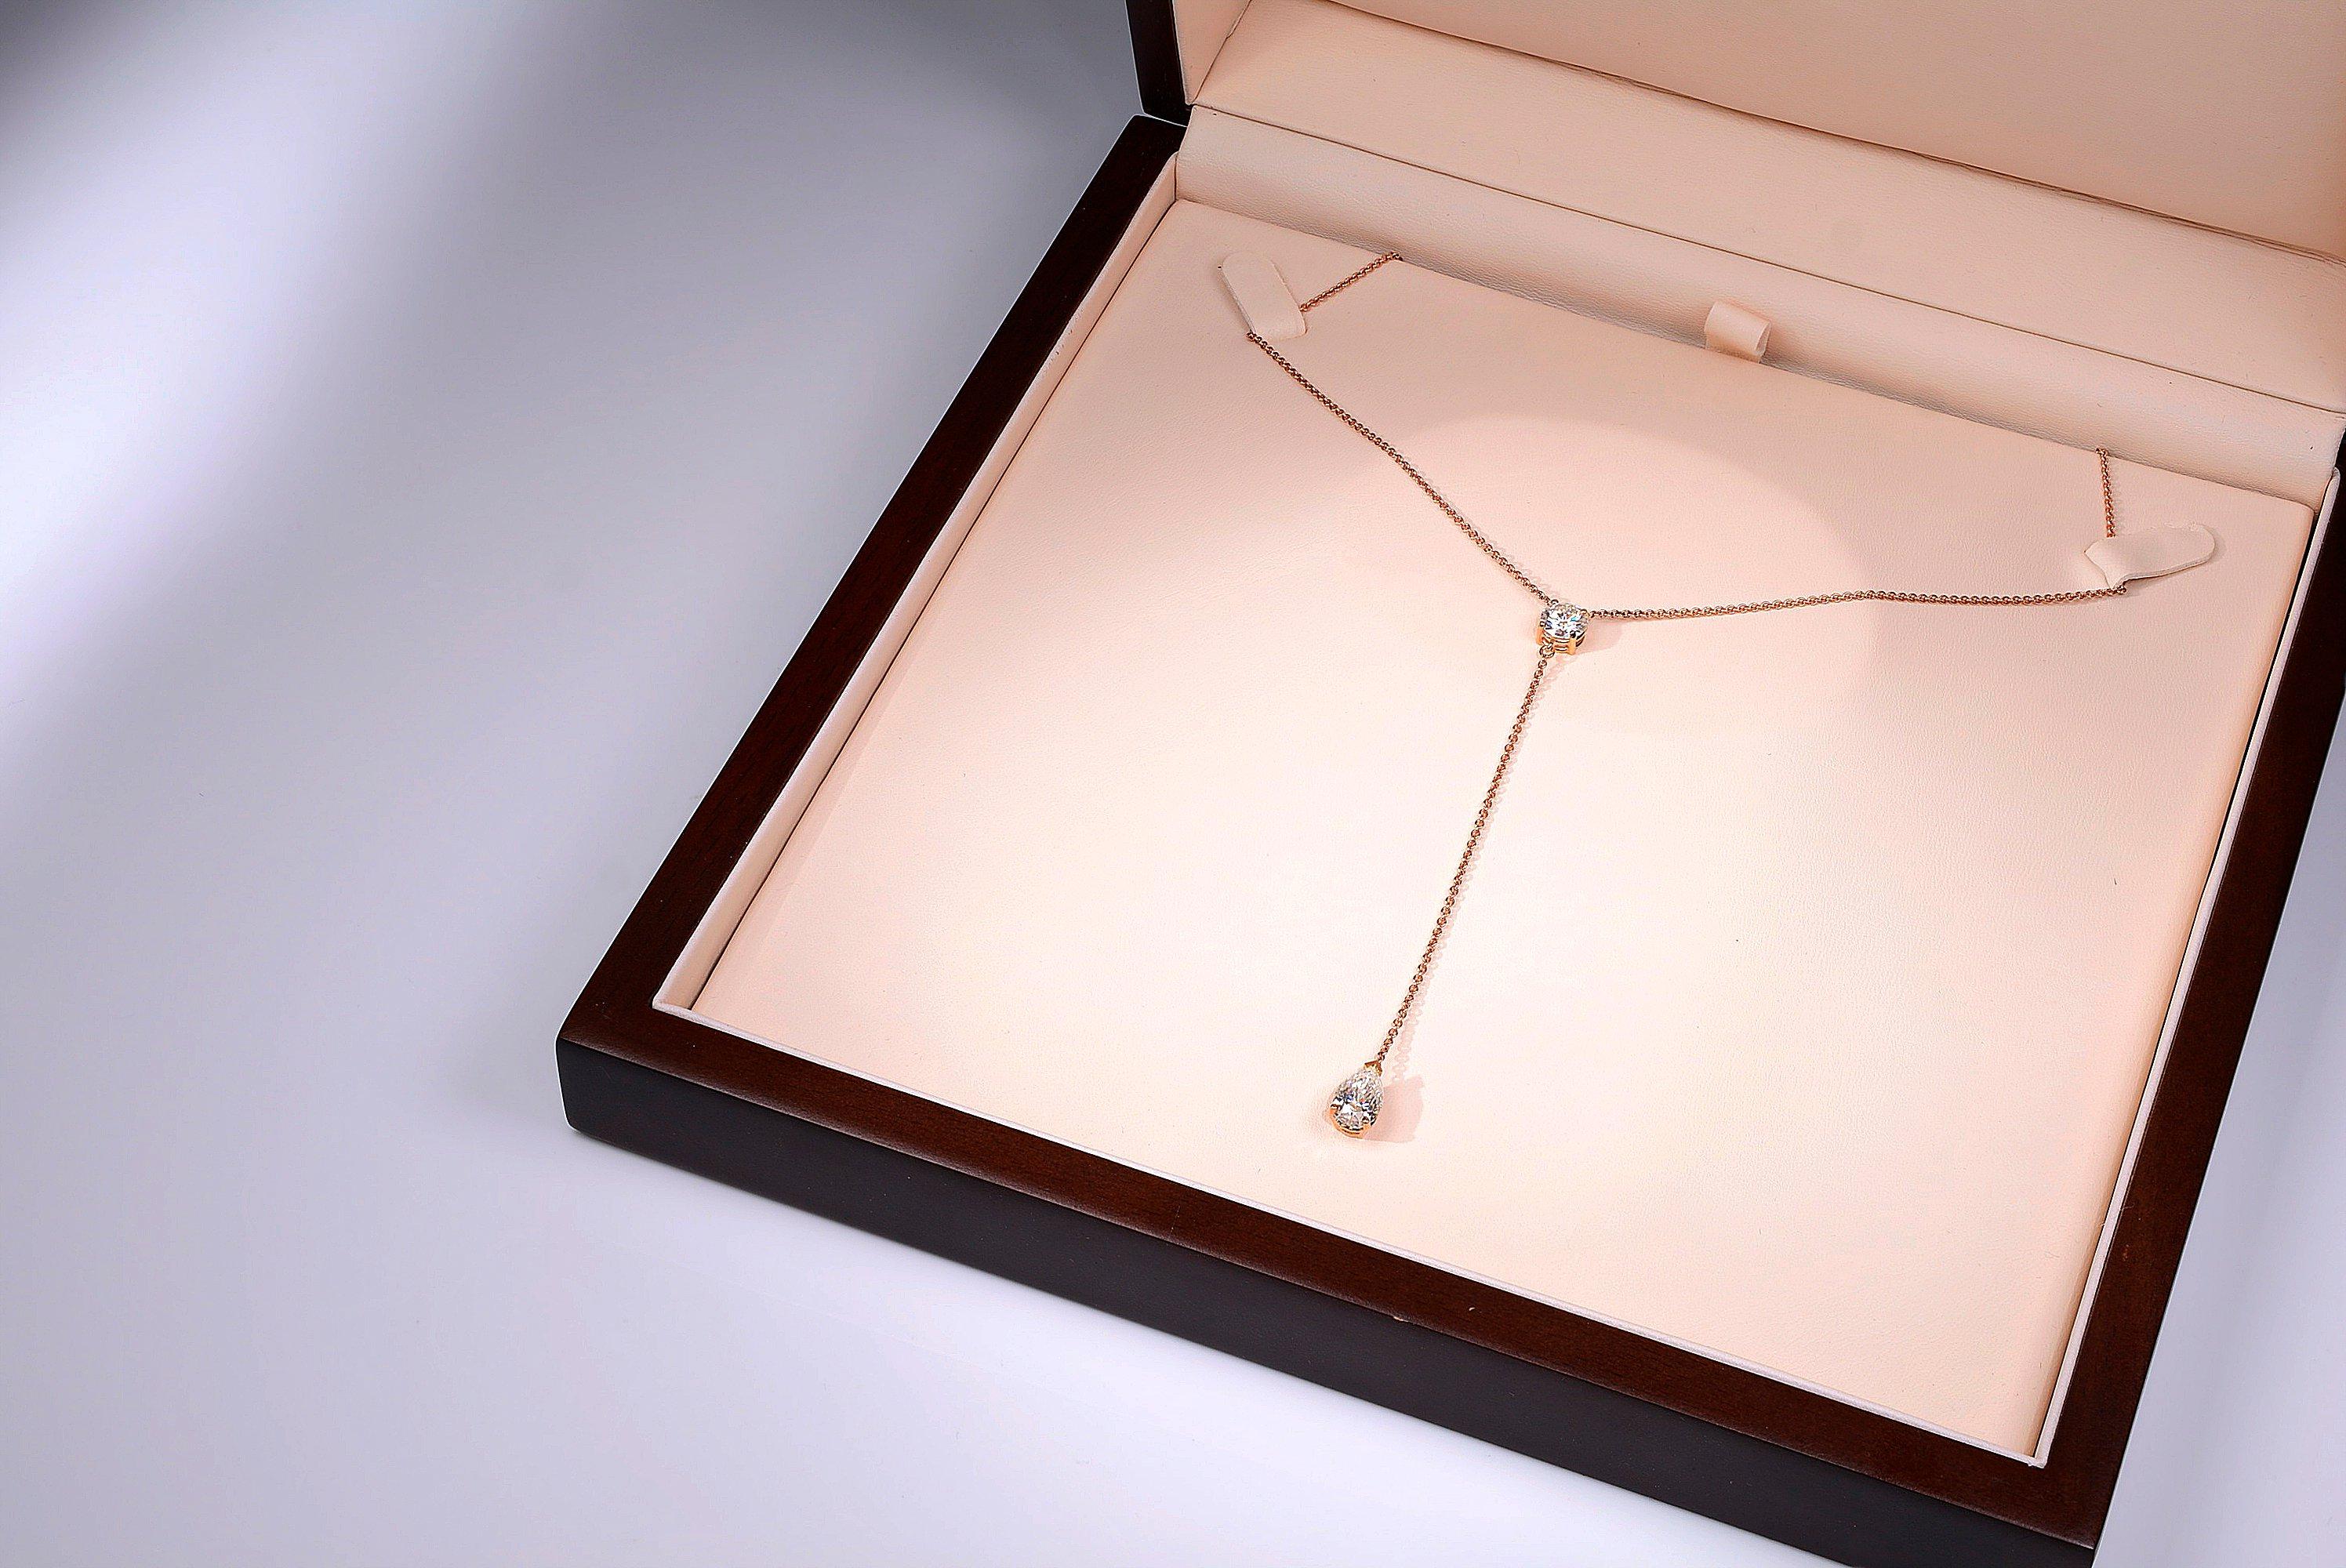 Timeless contemporary 18 karat rosé golden necklace featuring a 1.00 carat certified E/VVS1 round cut moissanite and a 1.50 carat certified E/VVS1 pear cut moissanite. Total length of the necklace is 40 cm and a drop of 8 cm.
Beautifully handmade